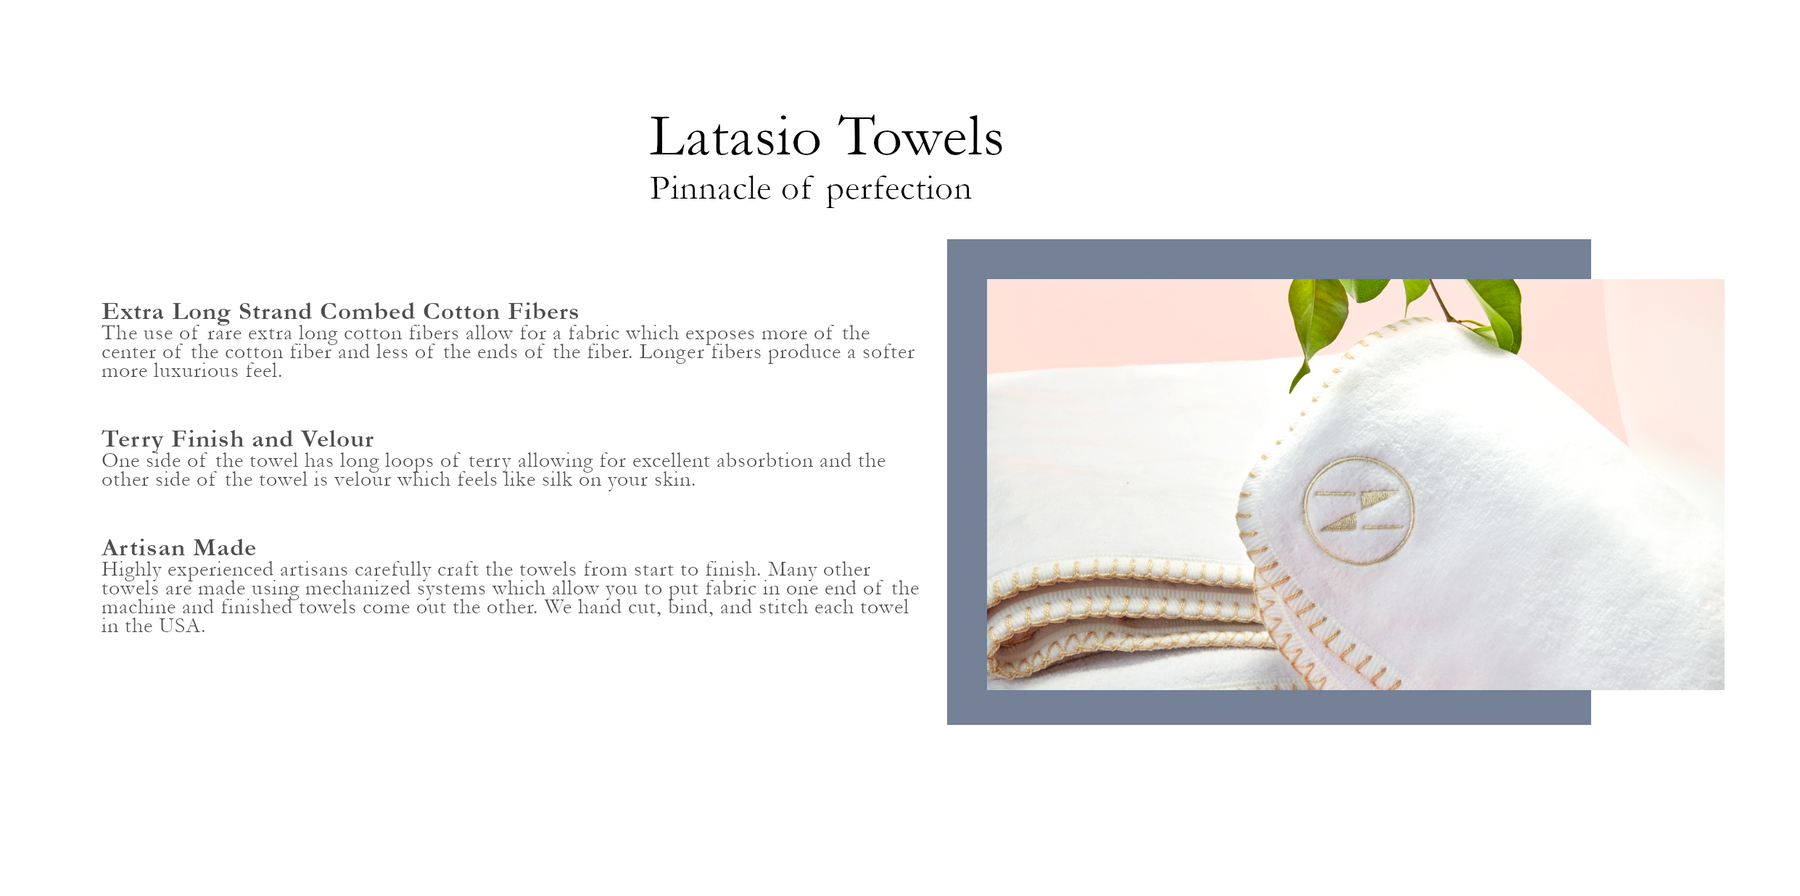 Description of Nabrini towels cotton, cotton finishes and artisan manufacturing, and image of 2 white towels folded.